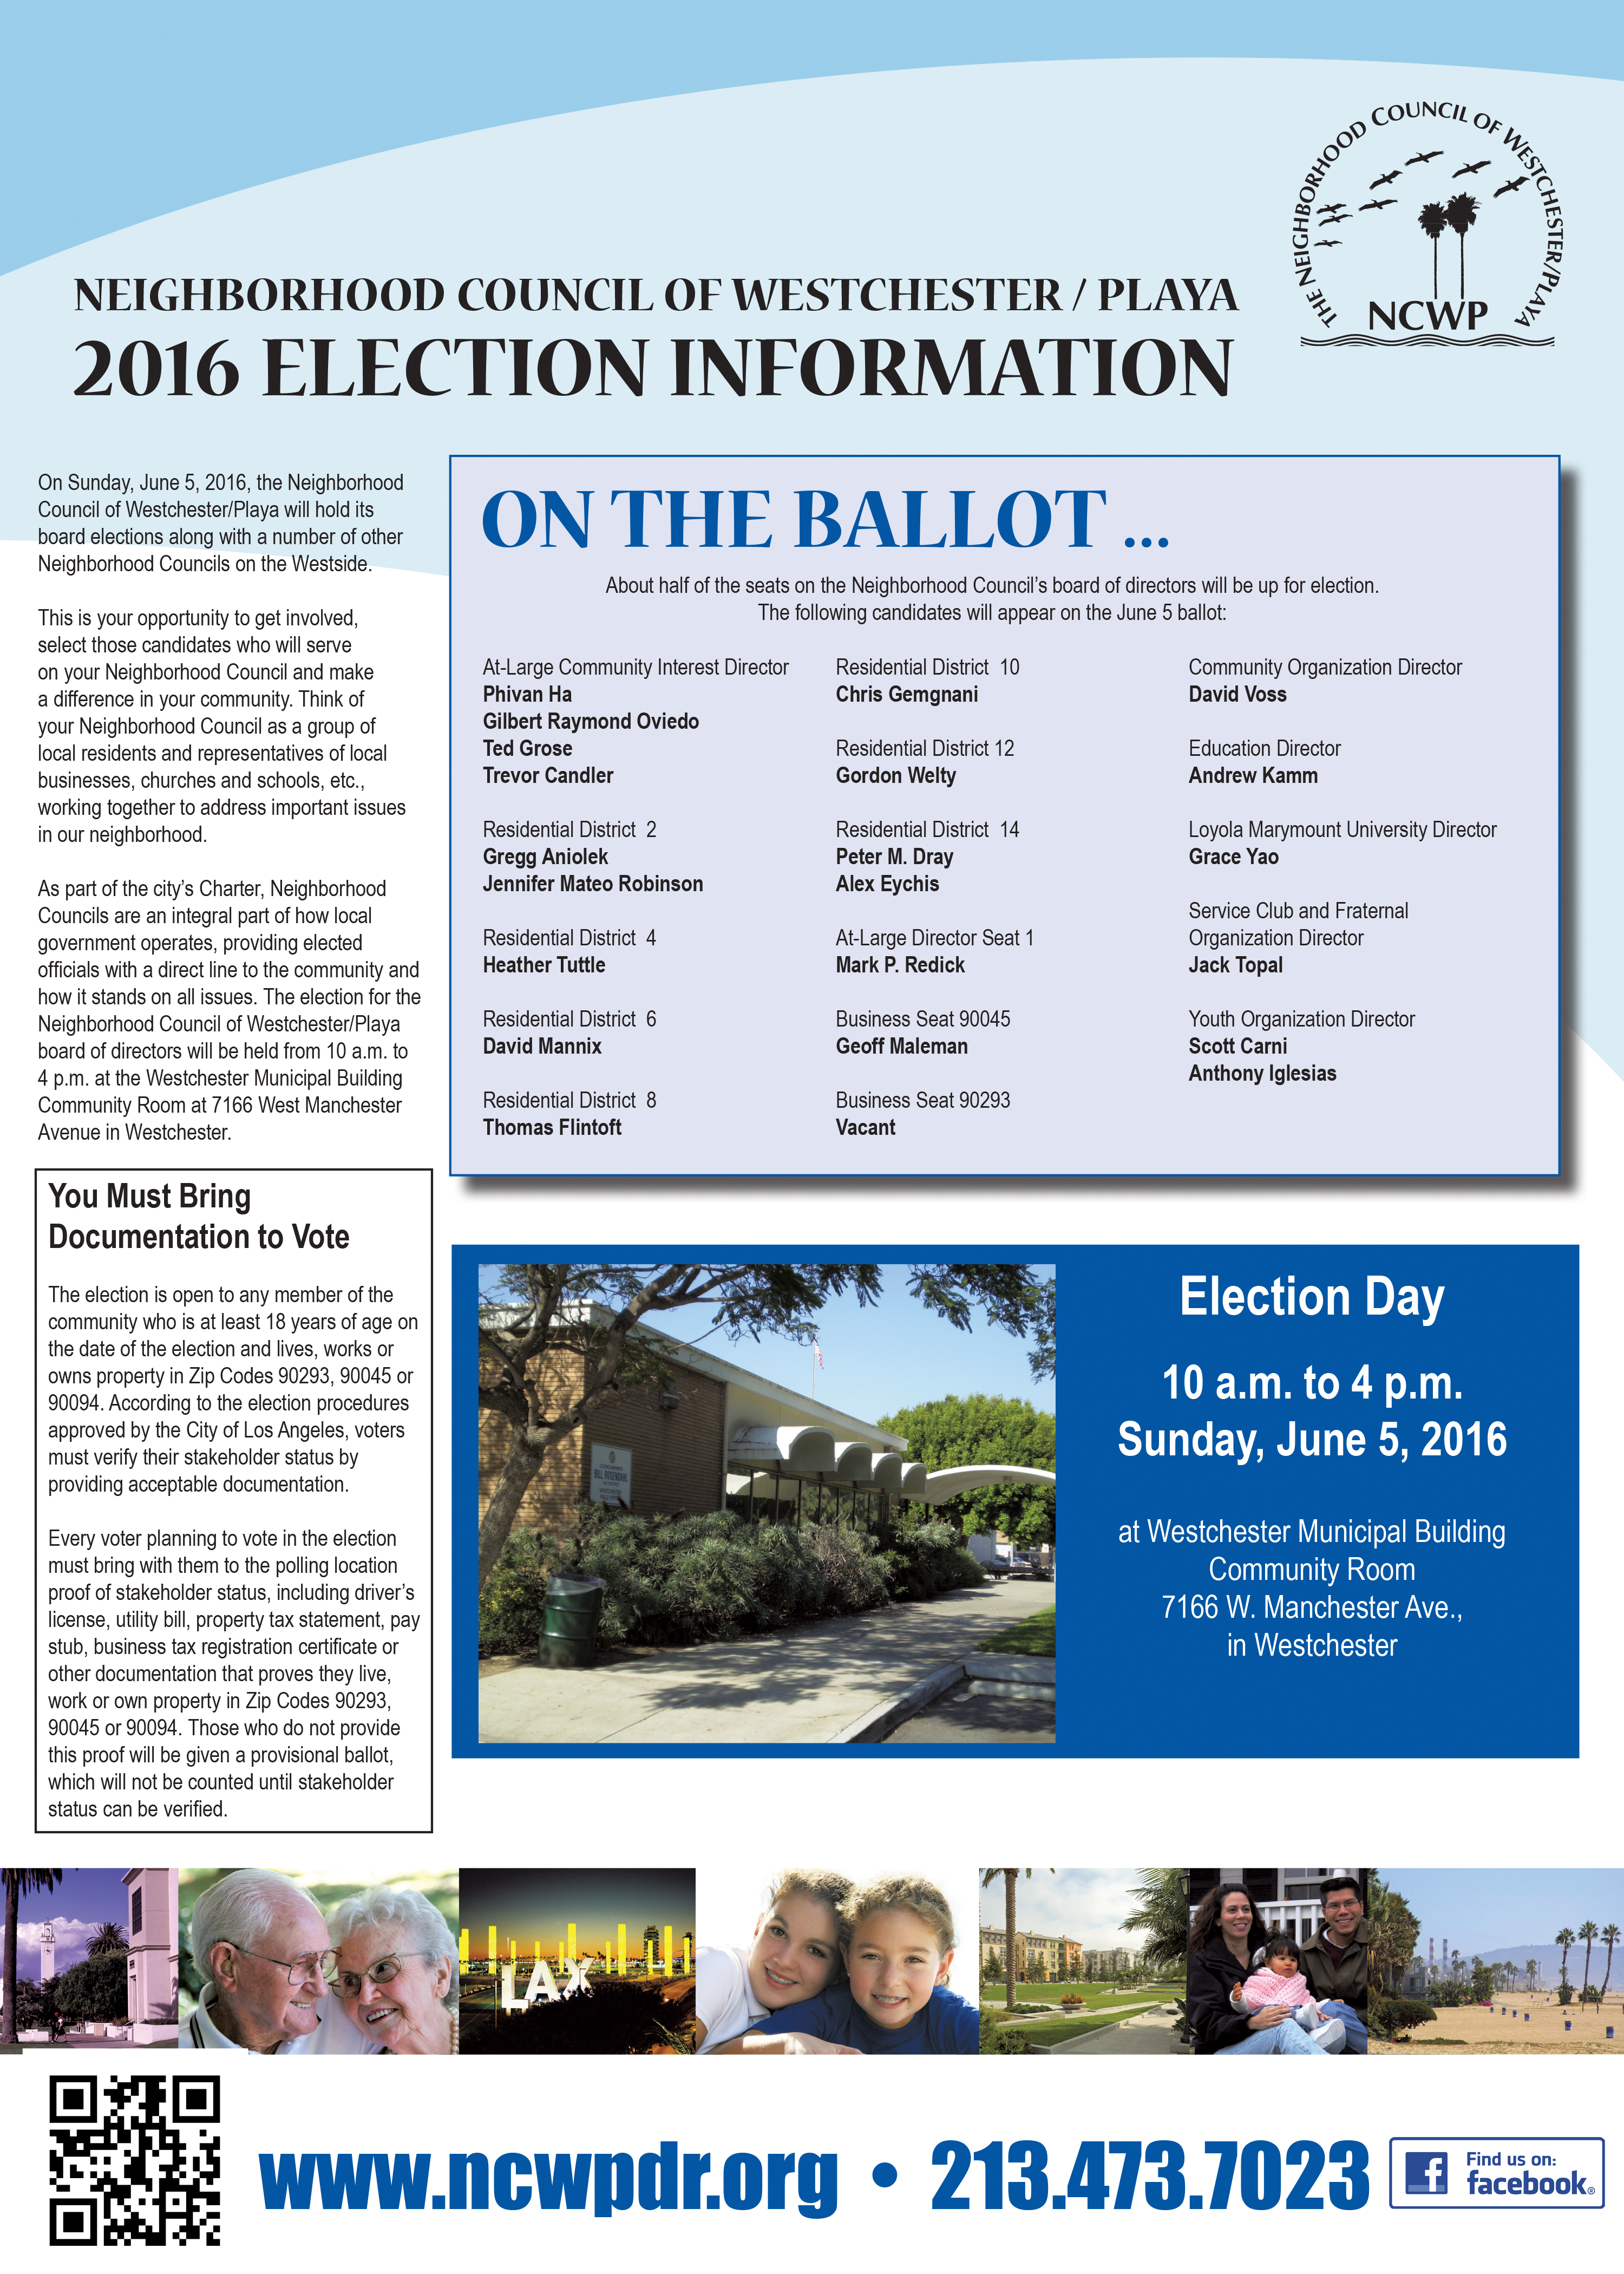 Community encouraged to vote in NCWP election